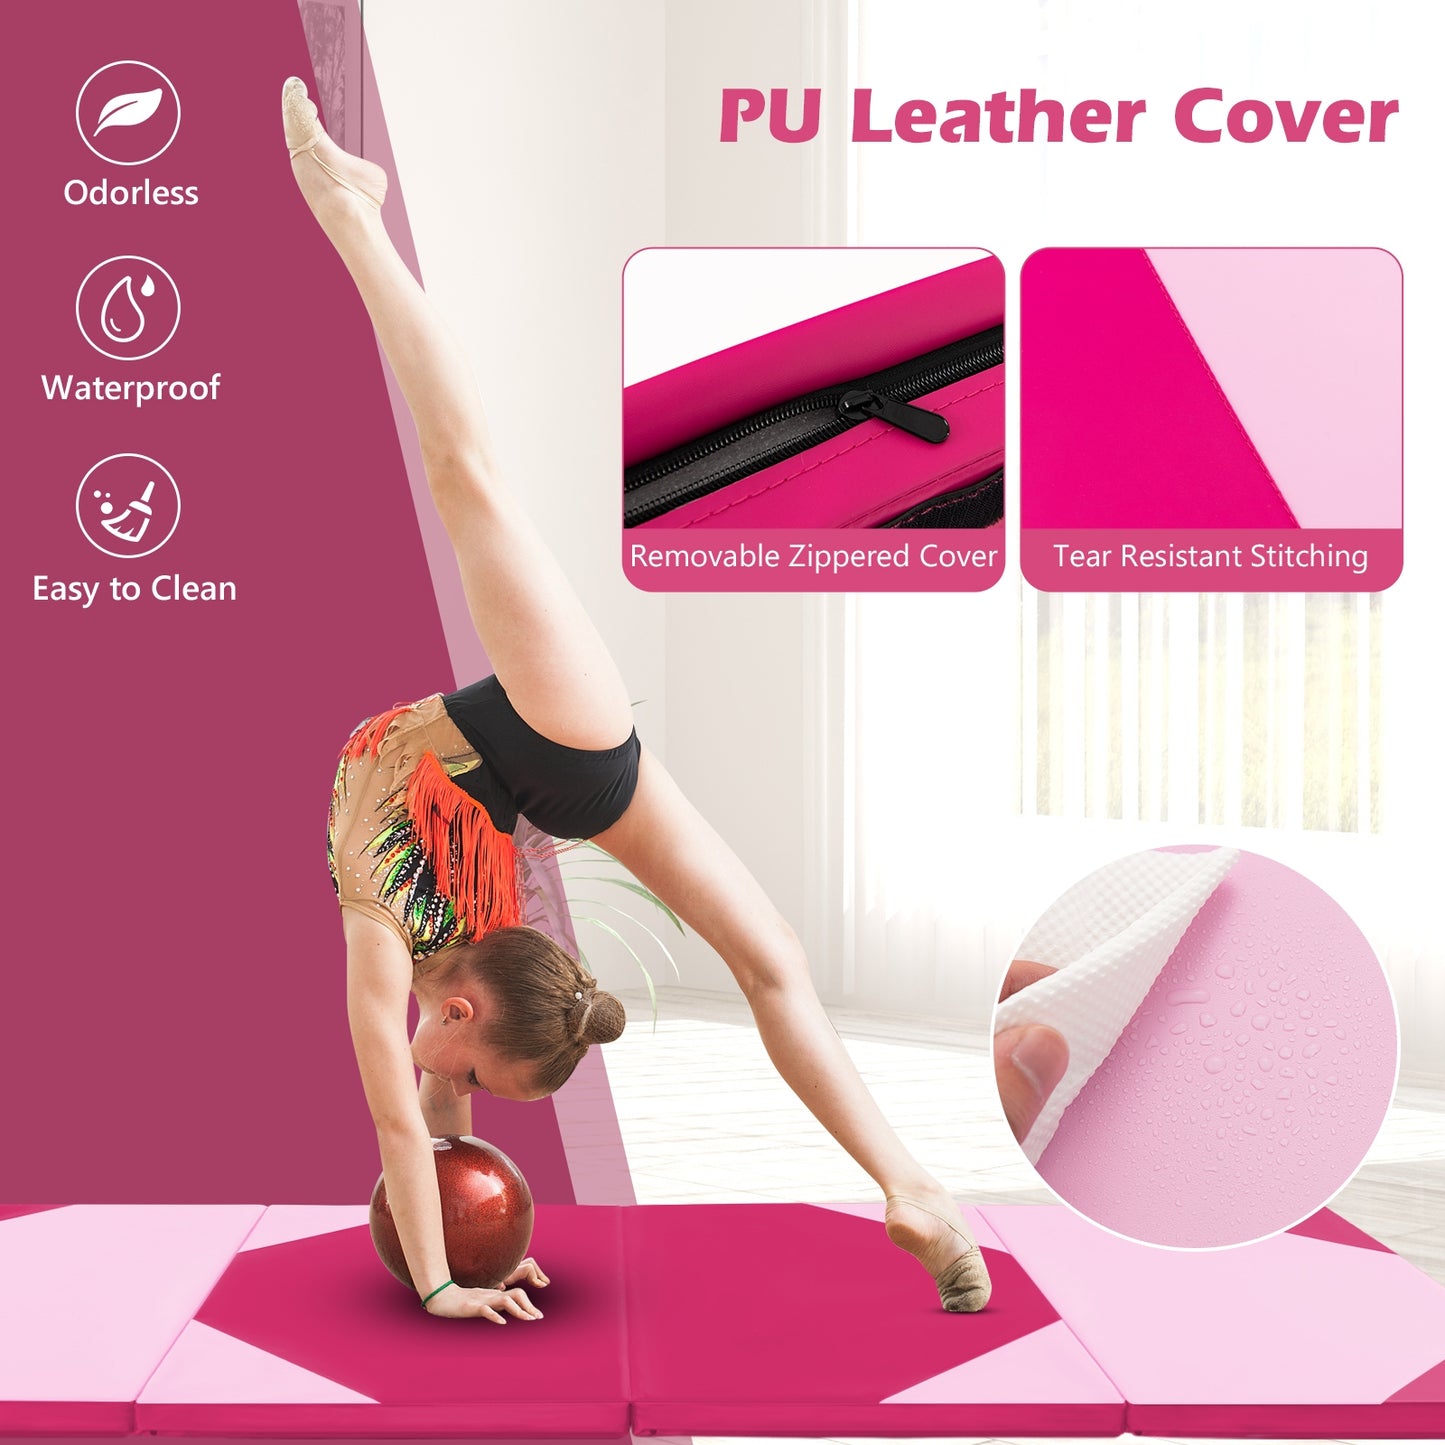 10' x 4' x 2" Folding Exercise Mat with Hook and Loop Fasteners-Hot Pink